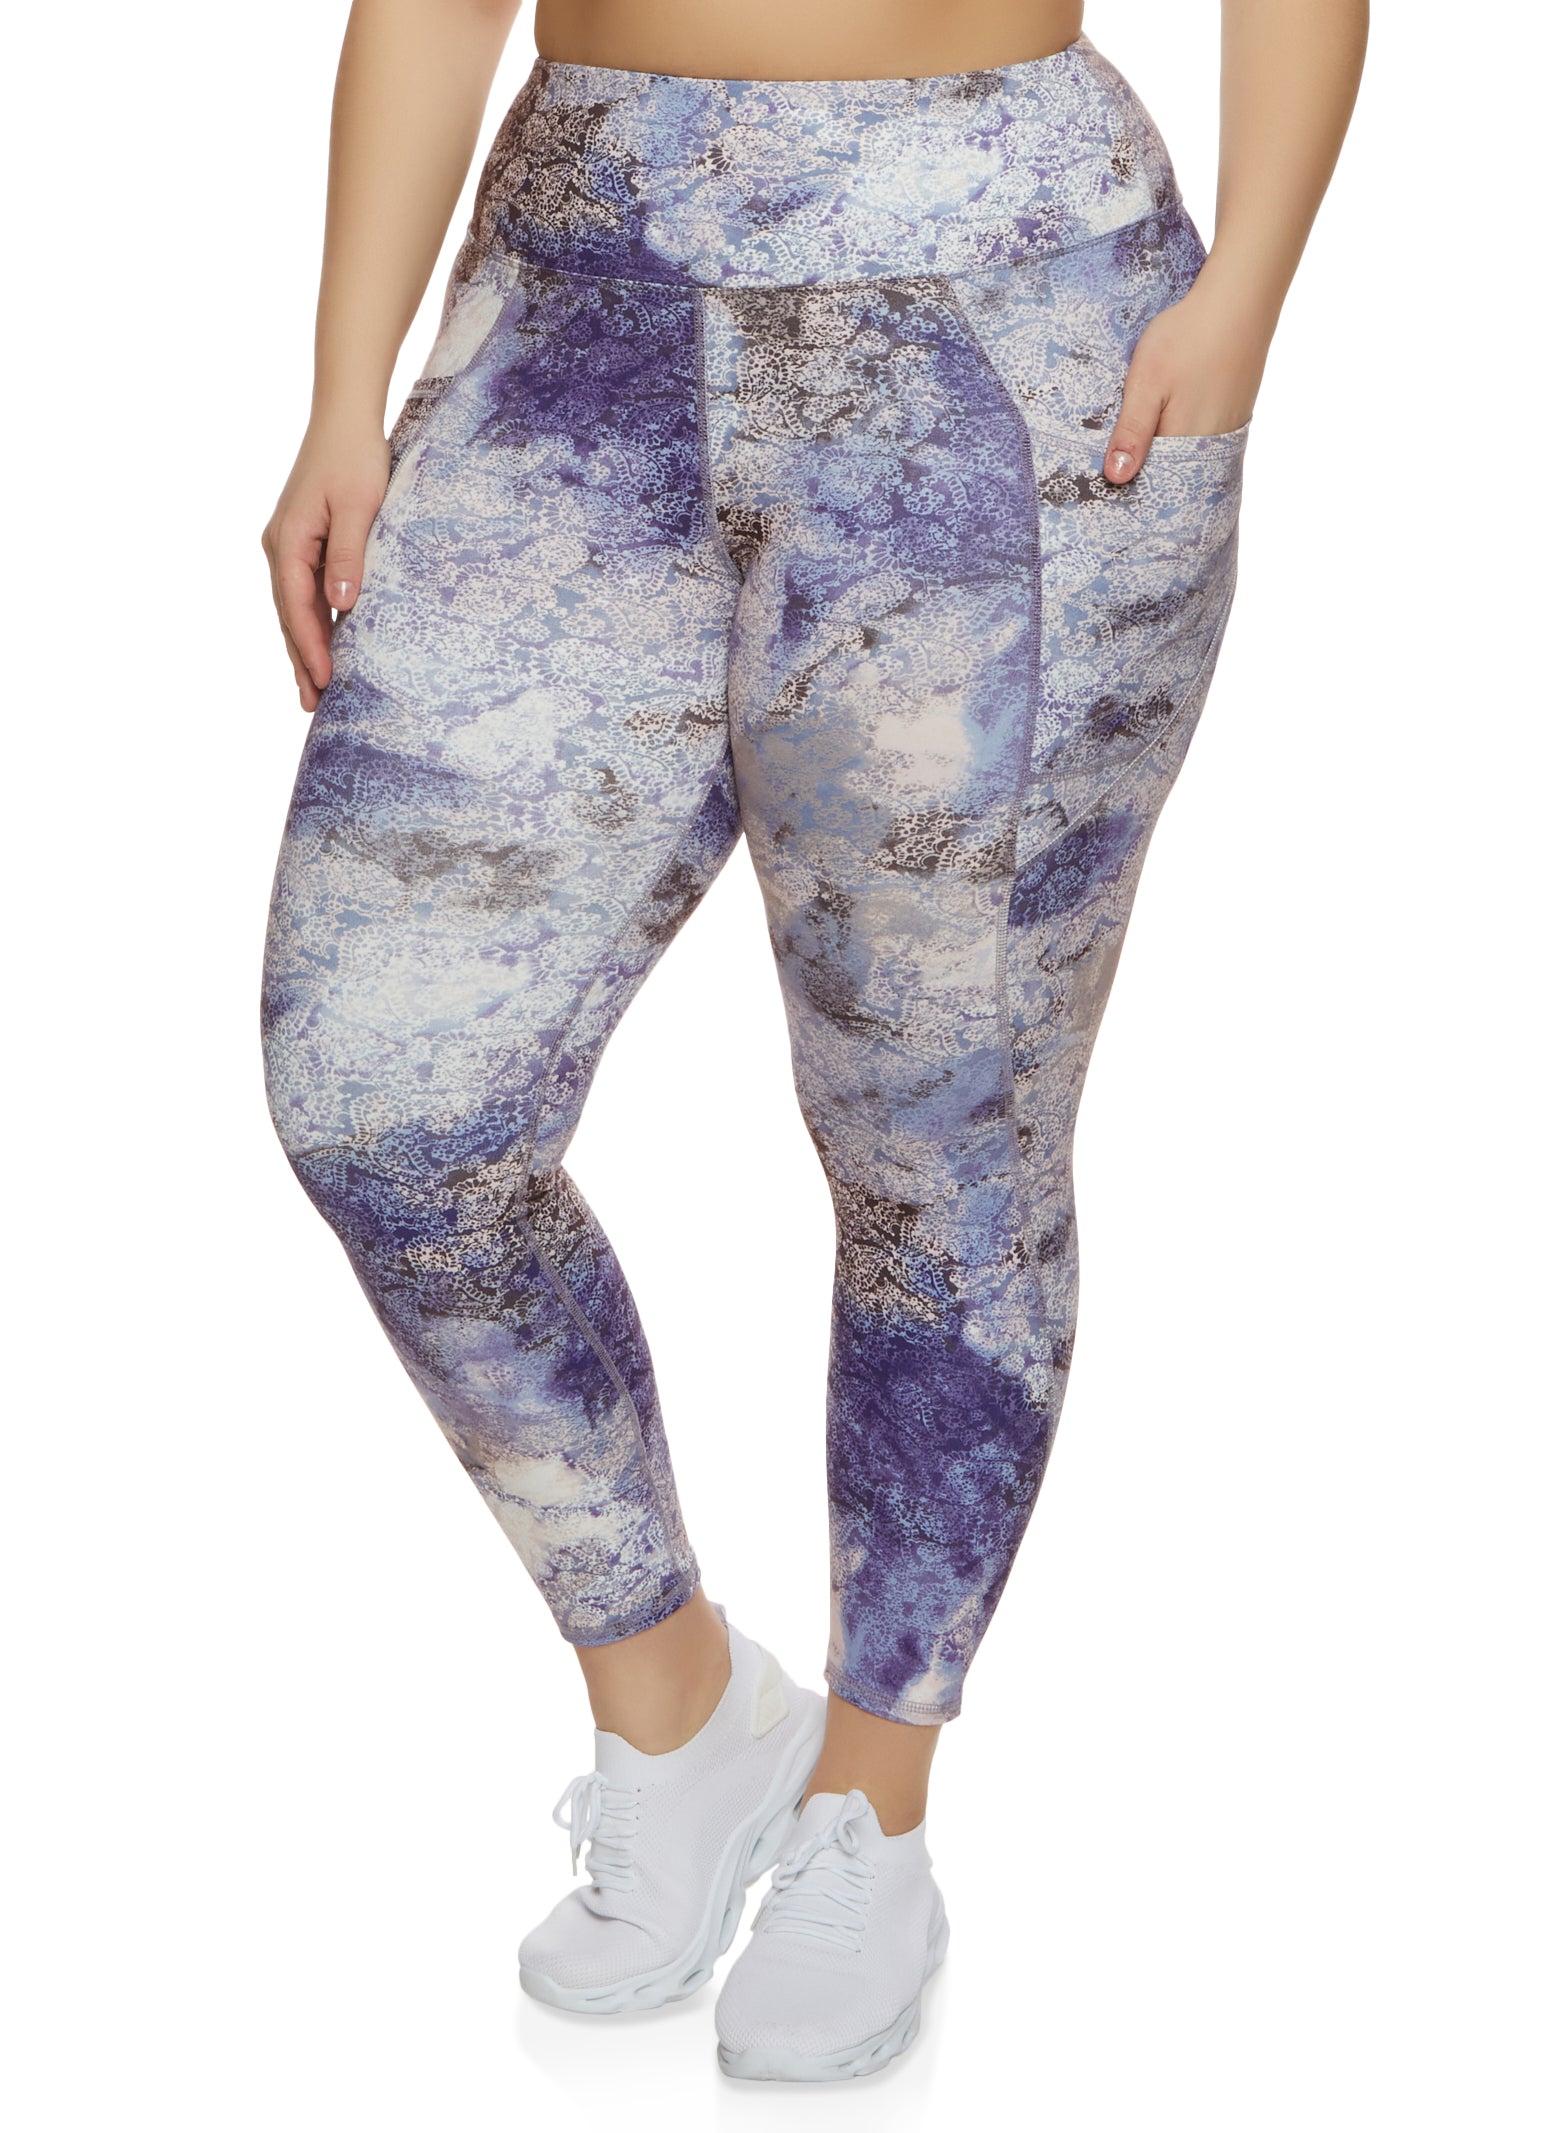 Plus Size Printed High Waisted Cell Phone Pocket Leggings - Rose